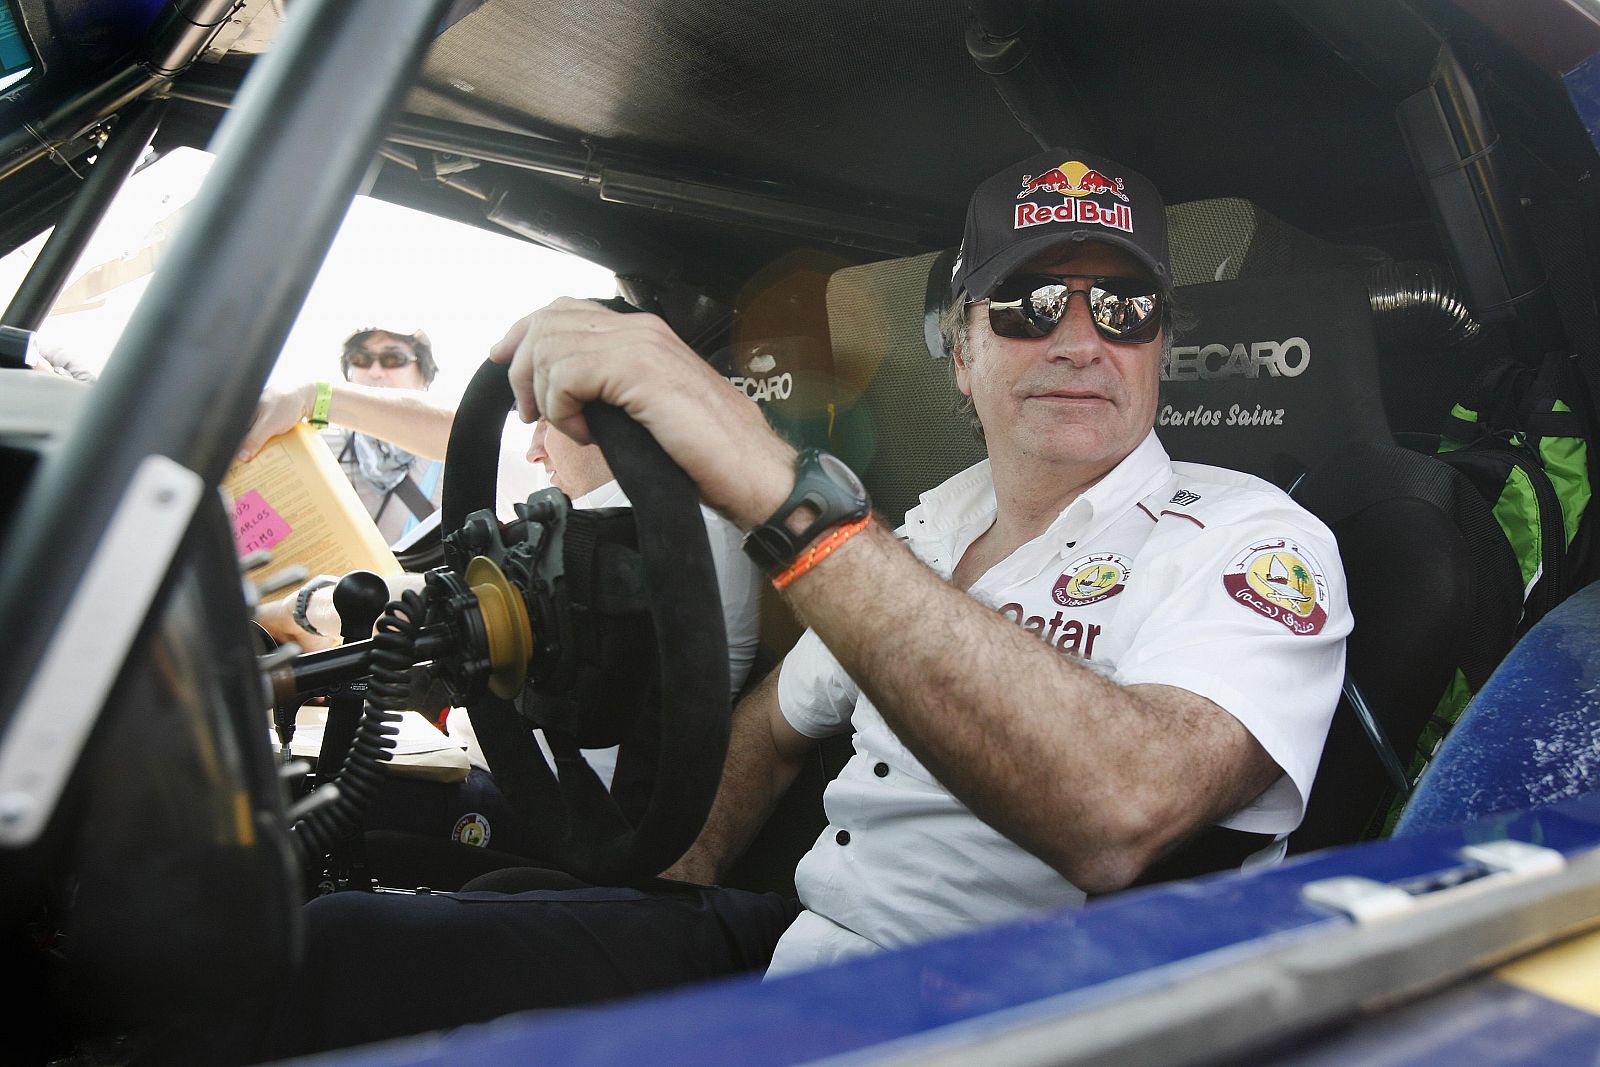 Spain's Sainz sits in his buggy after passing the technical verification exercise of the Dakar Rally 2013 at Magdalena beach in Lima